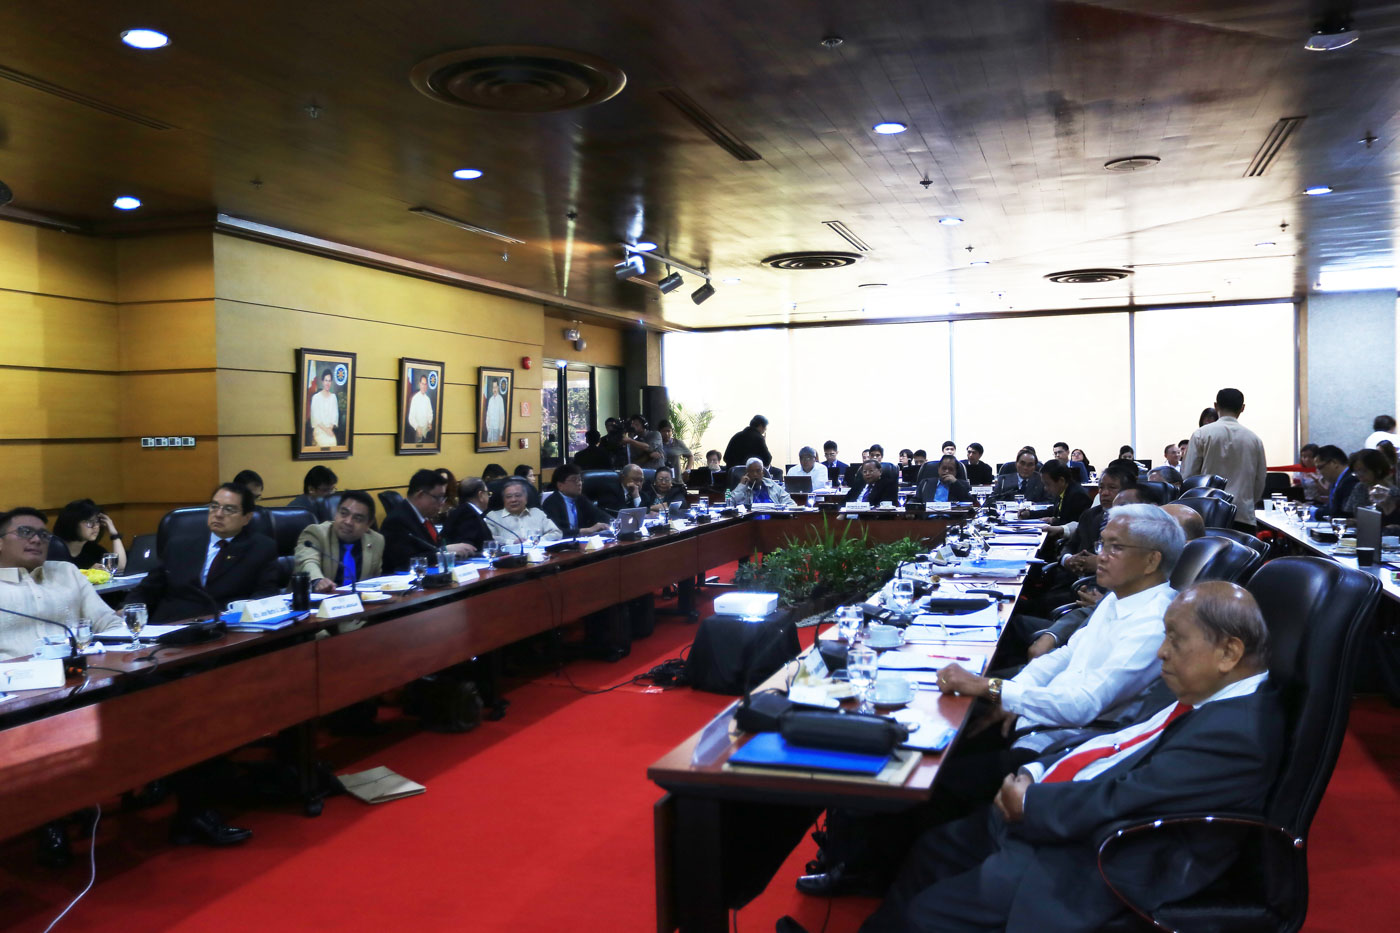 PLANNING A SHIFT. The Consultative Committee votes on the draft federal constitution to be submitted to President Rodrigo Duterte. Photo by Ben Nabong/Rappler 